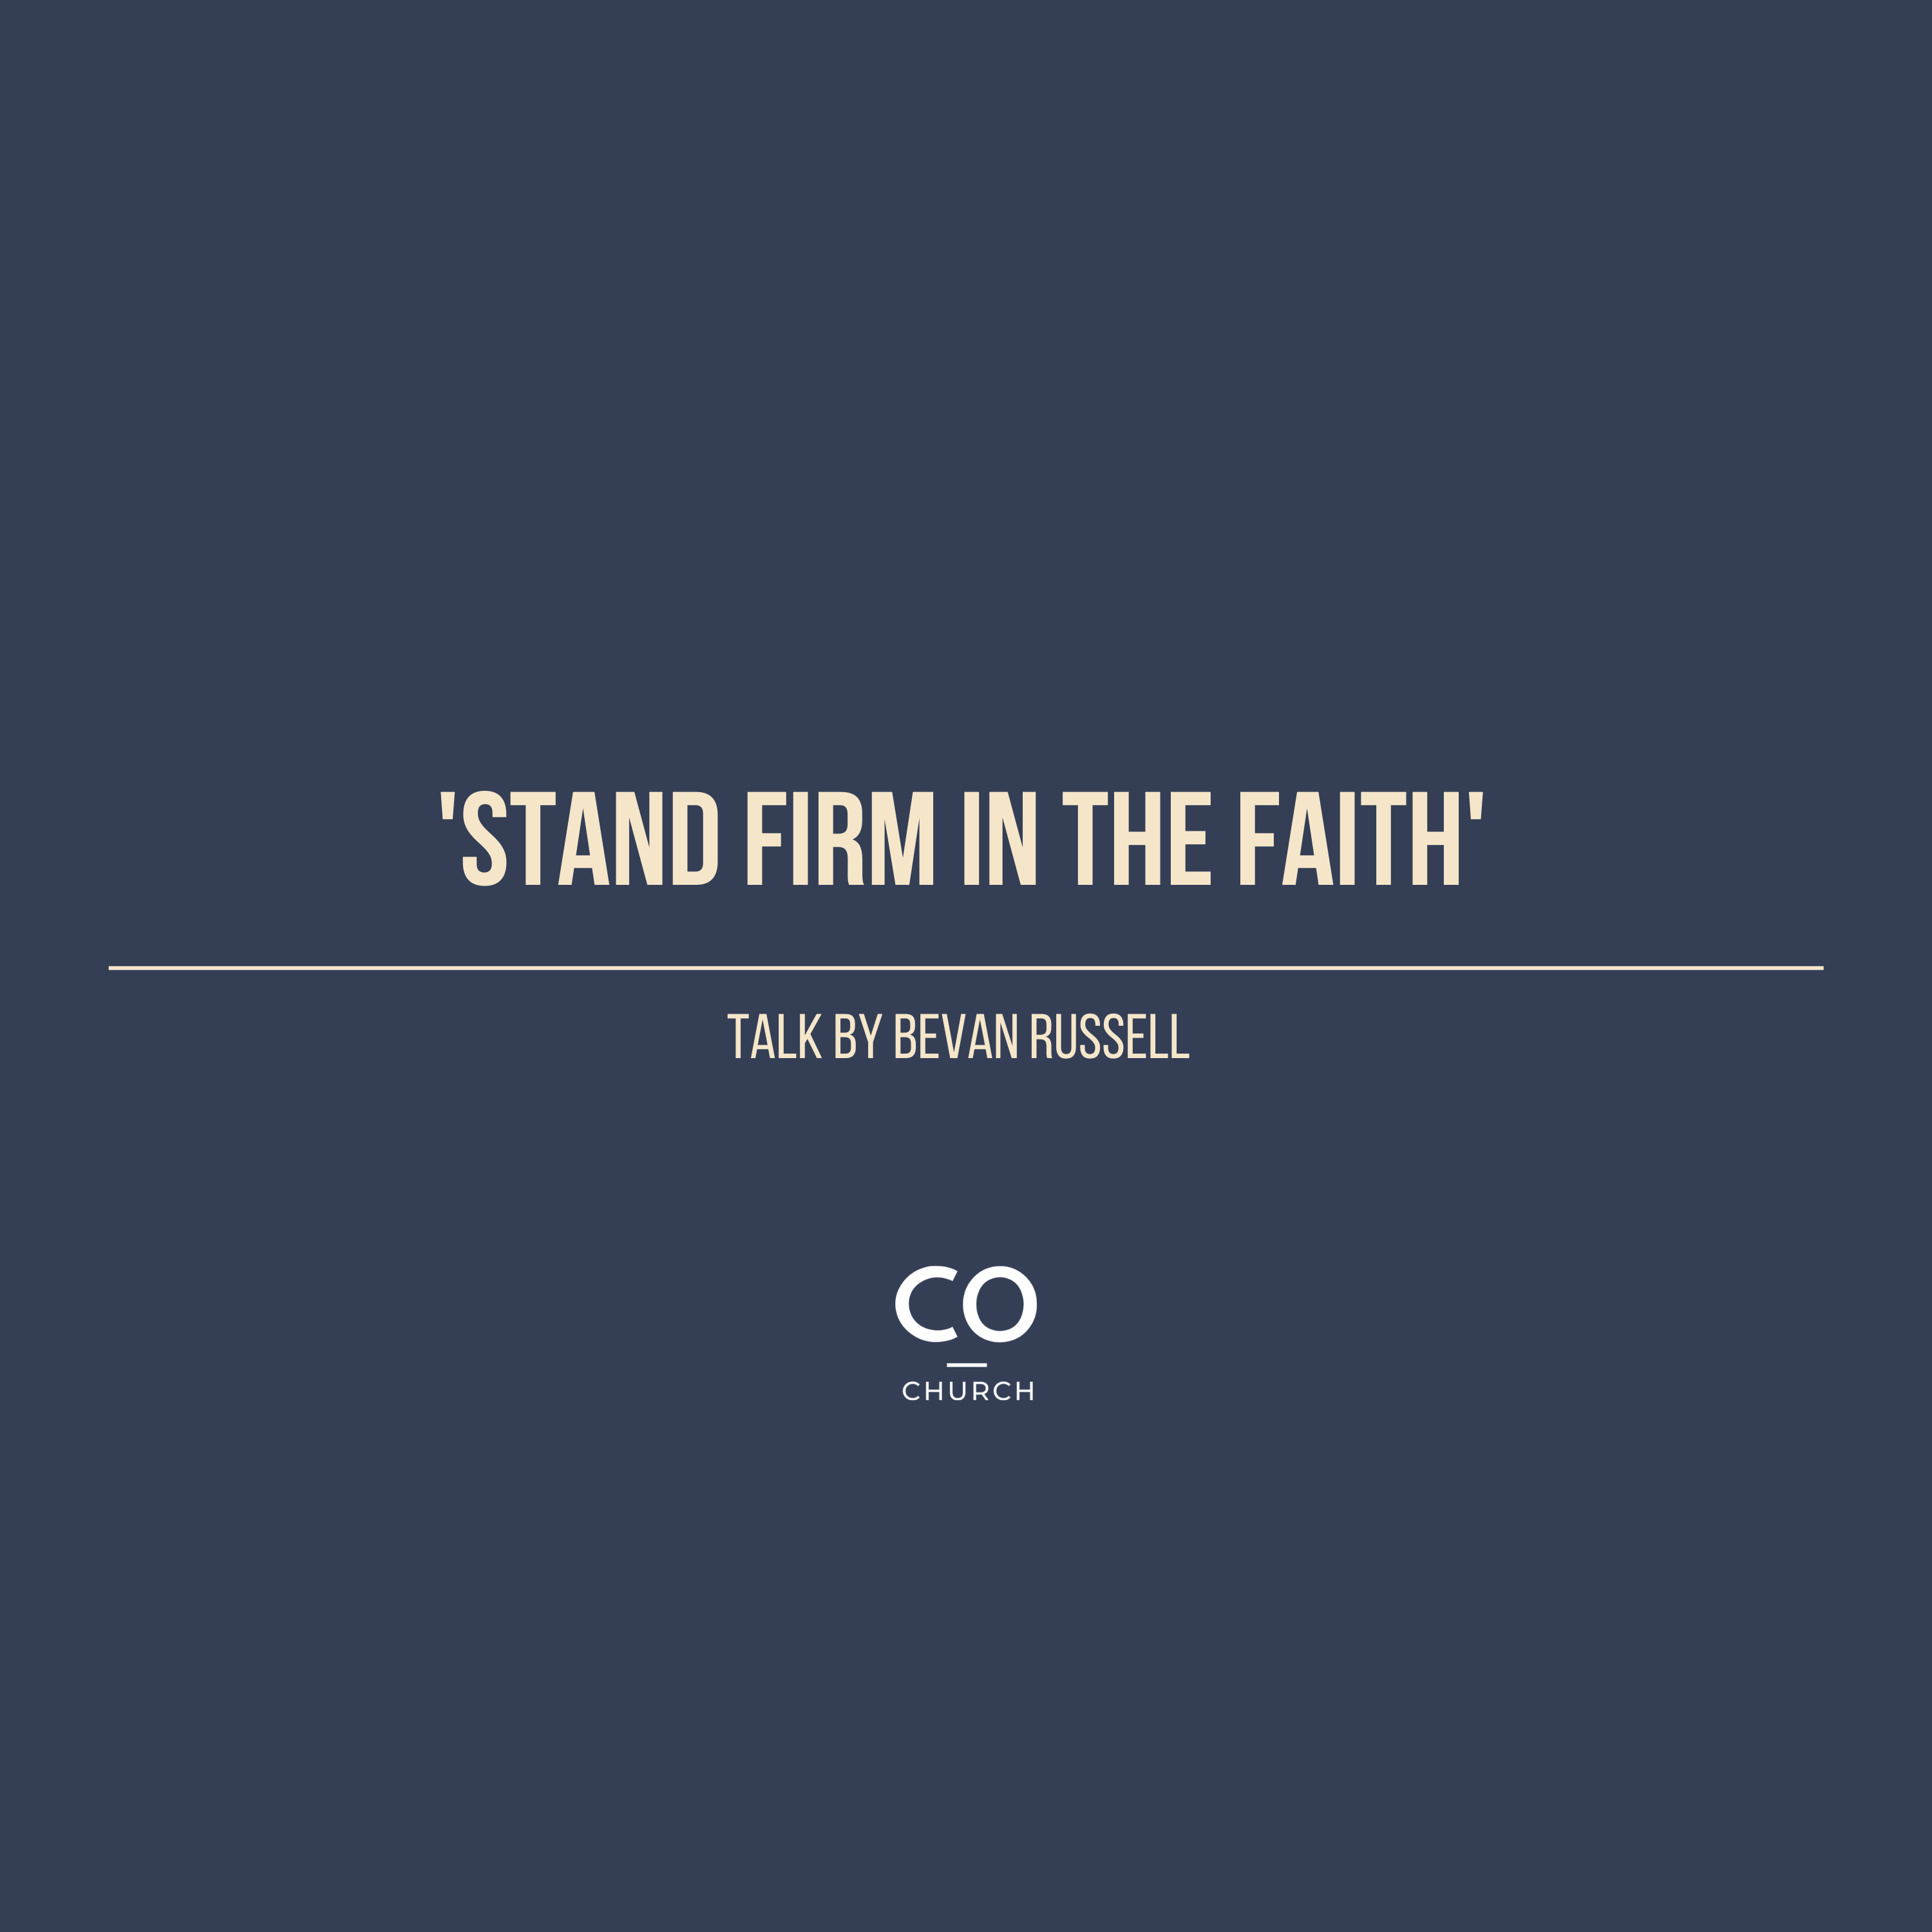 Stand Firm In The Faith - a teaching by Bevan Russell from 1 Peter 1:6-7.